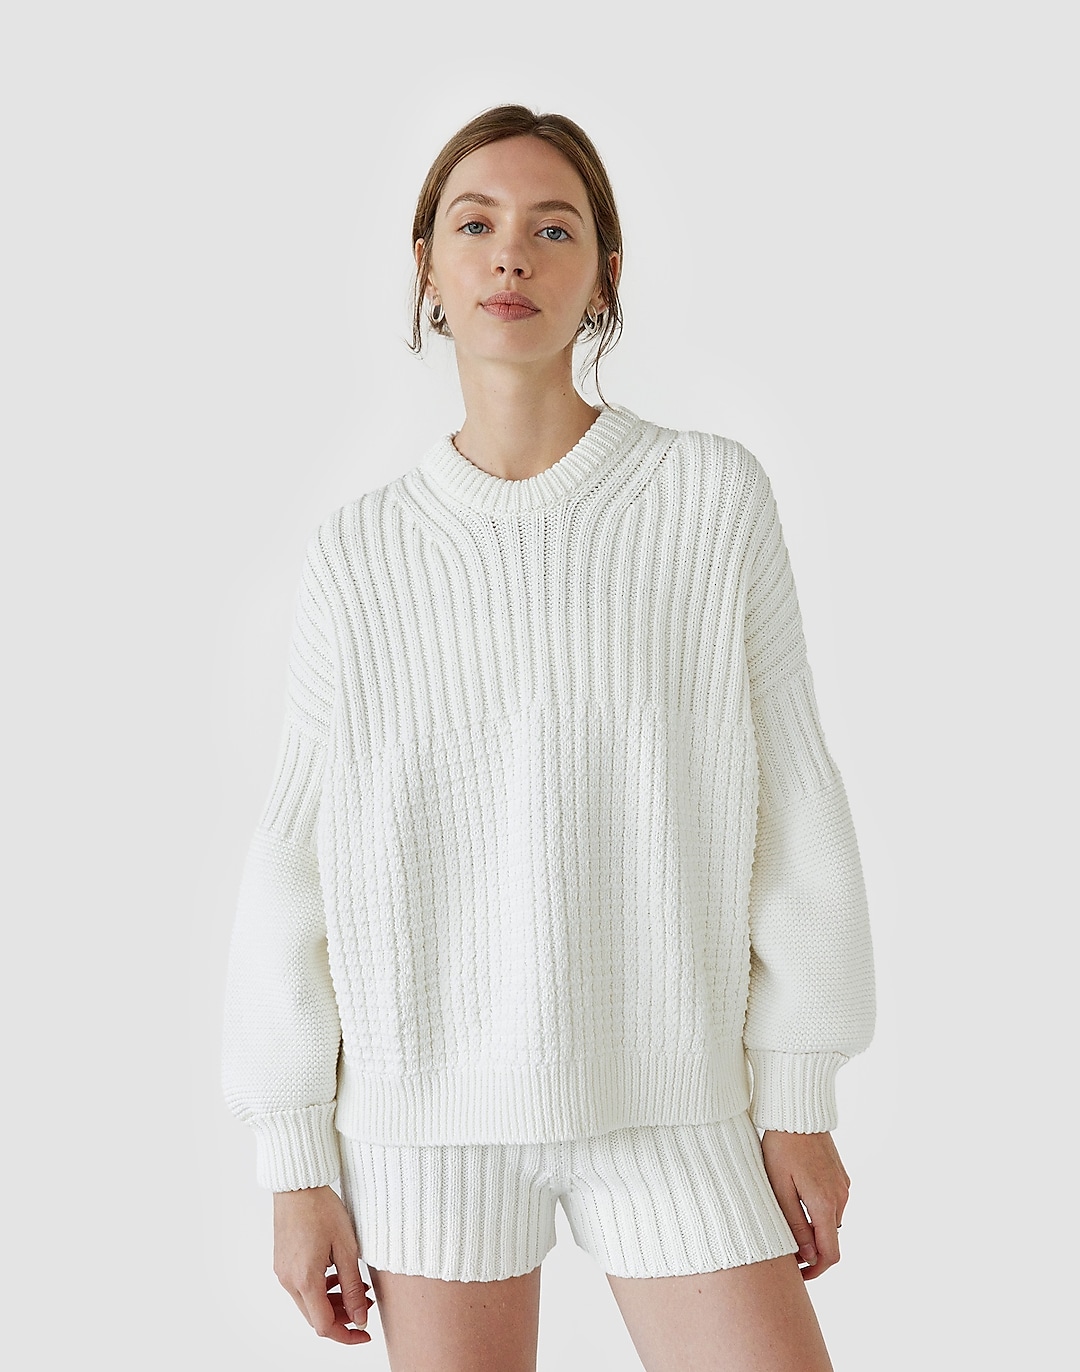 The Knotty Ones Delčia Cotton Sweater | Madewell